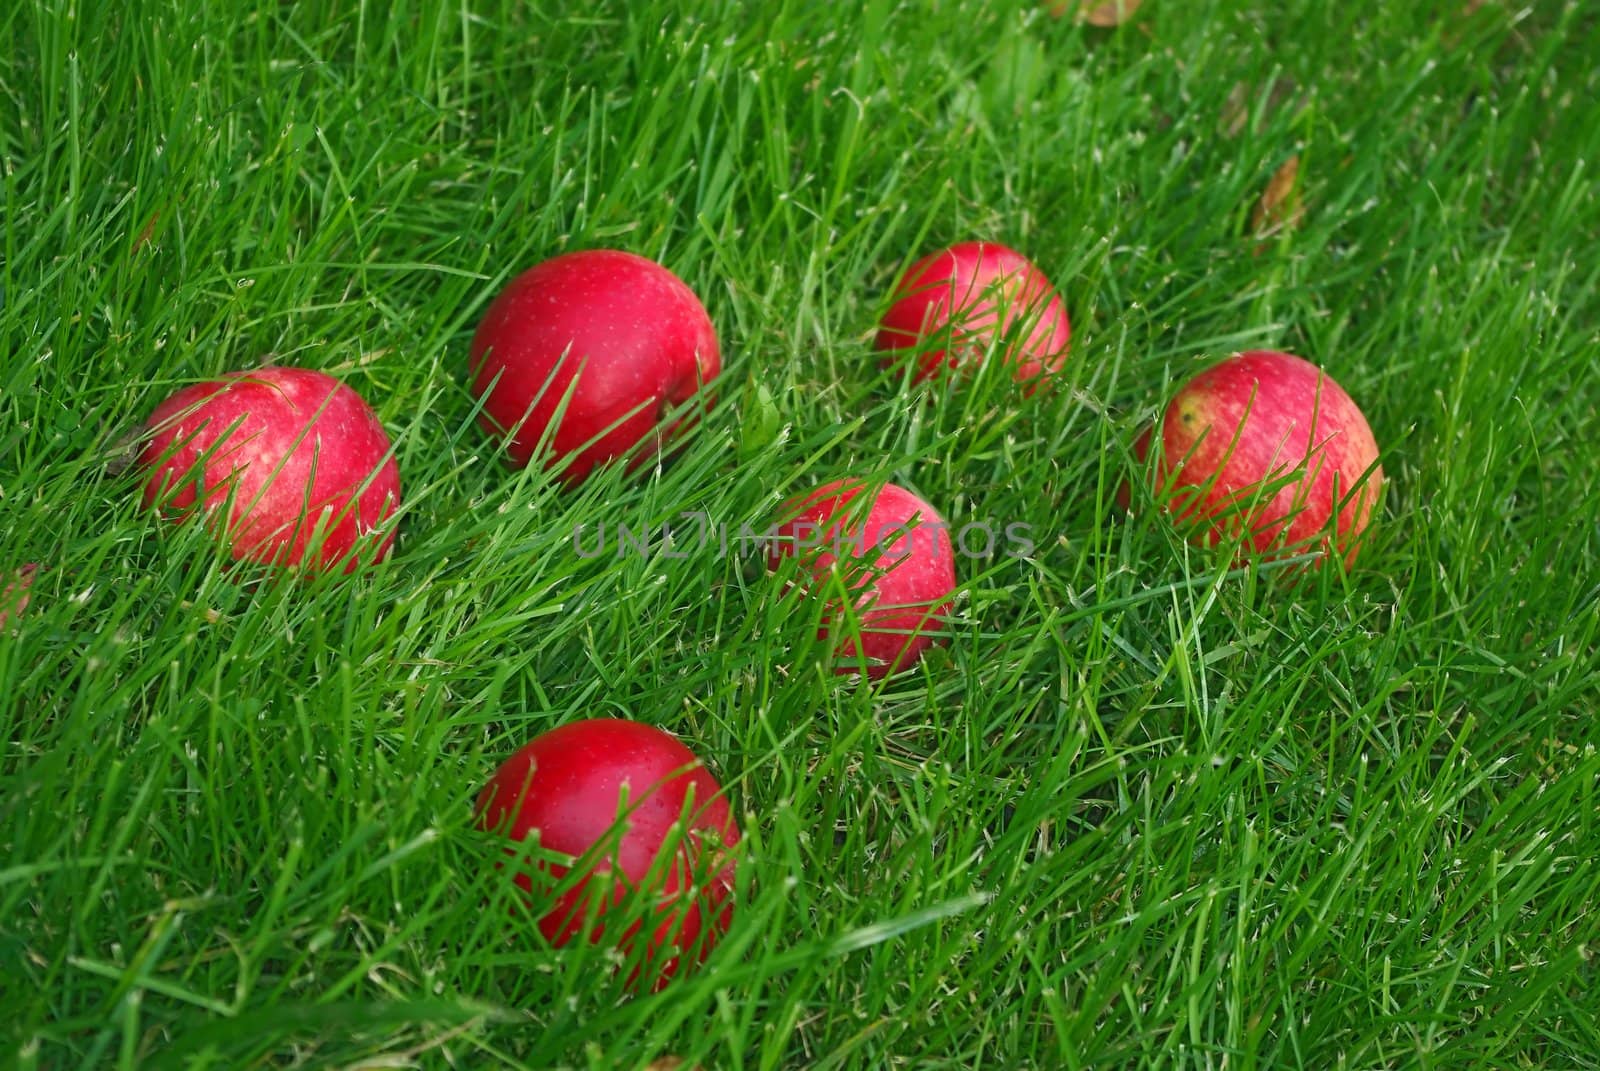 Red Apple In Grass by Vitamin